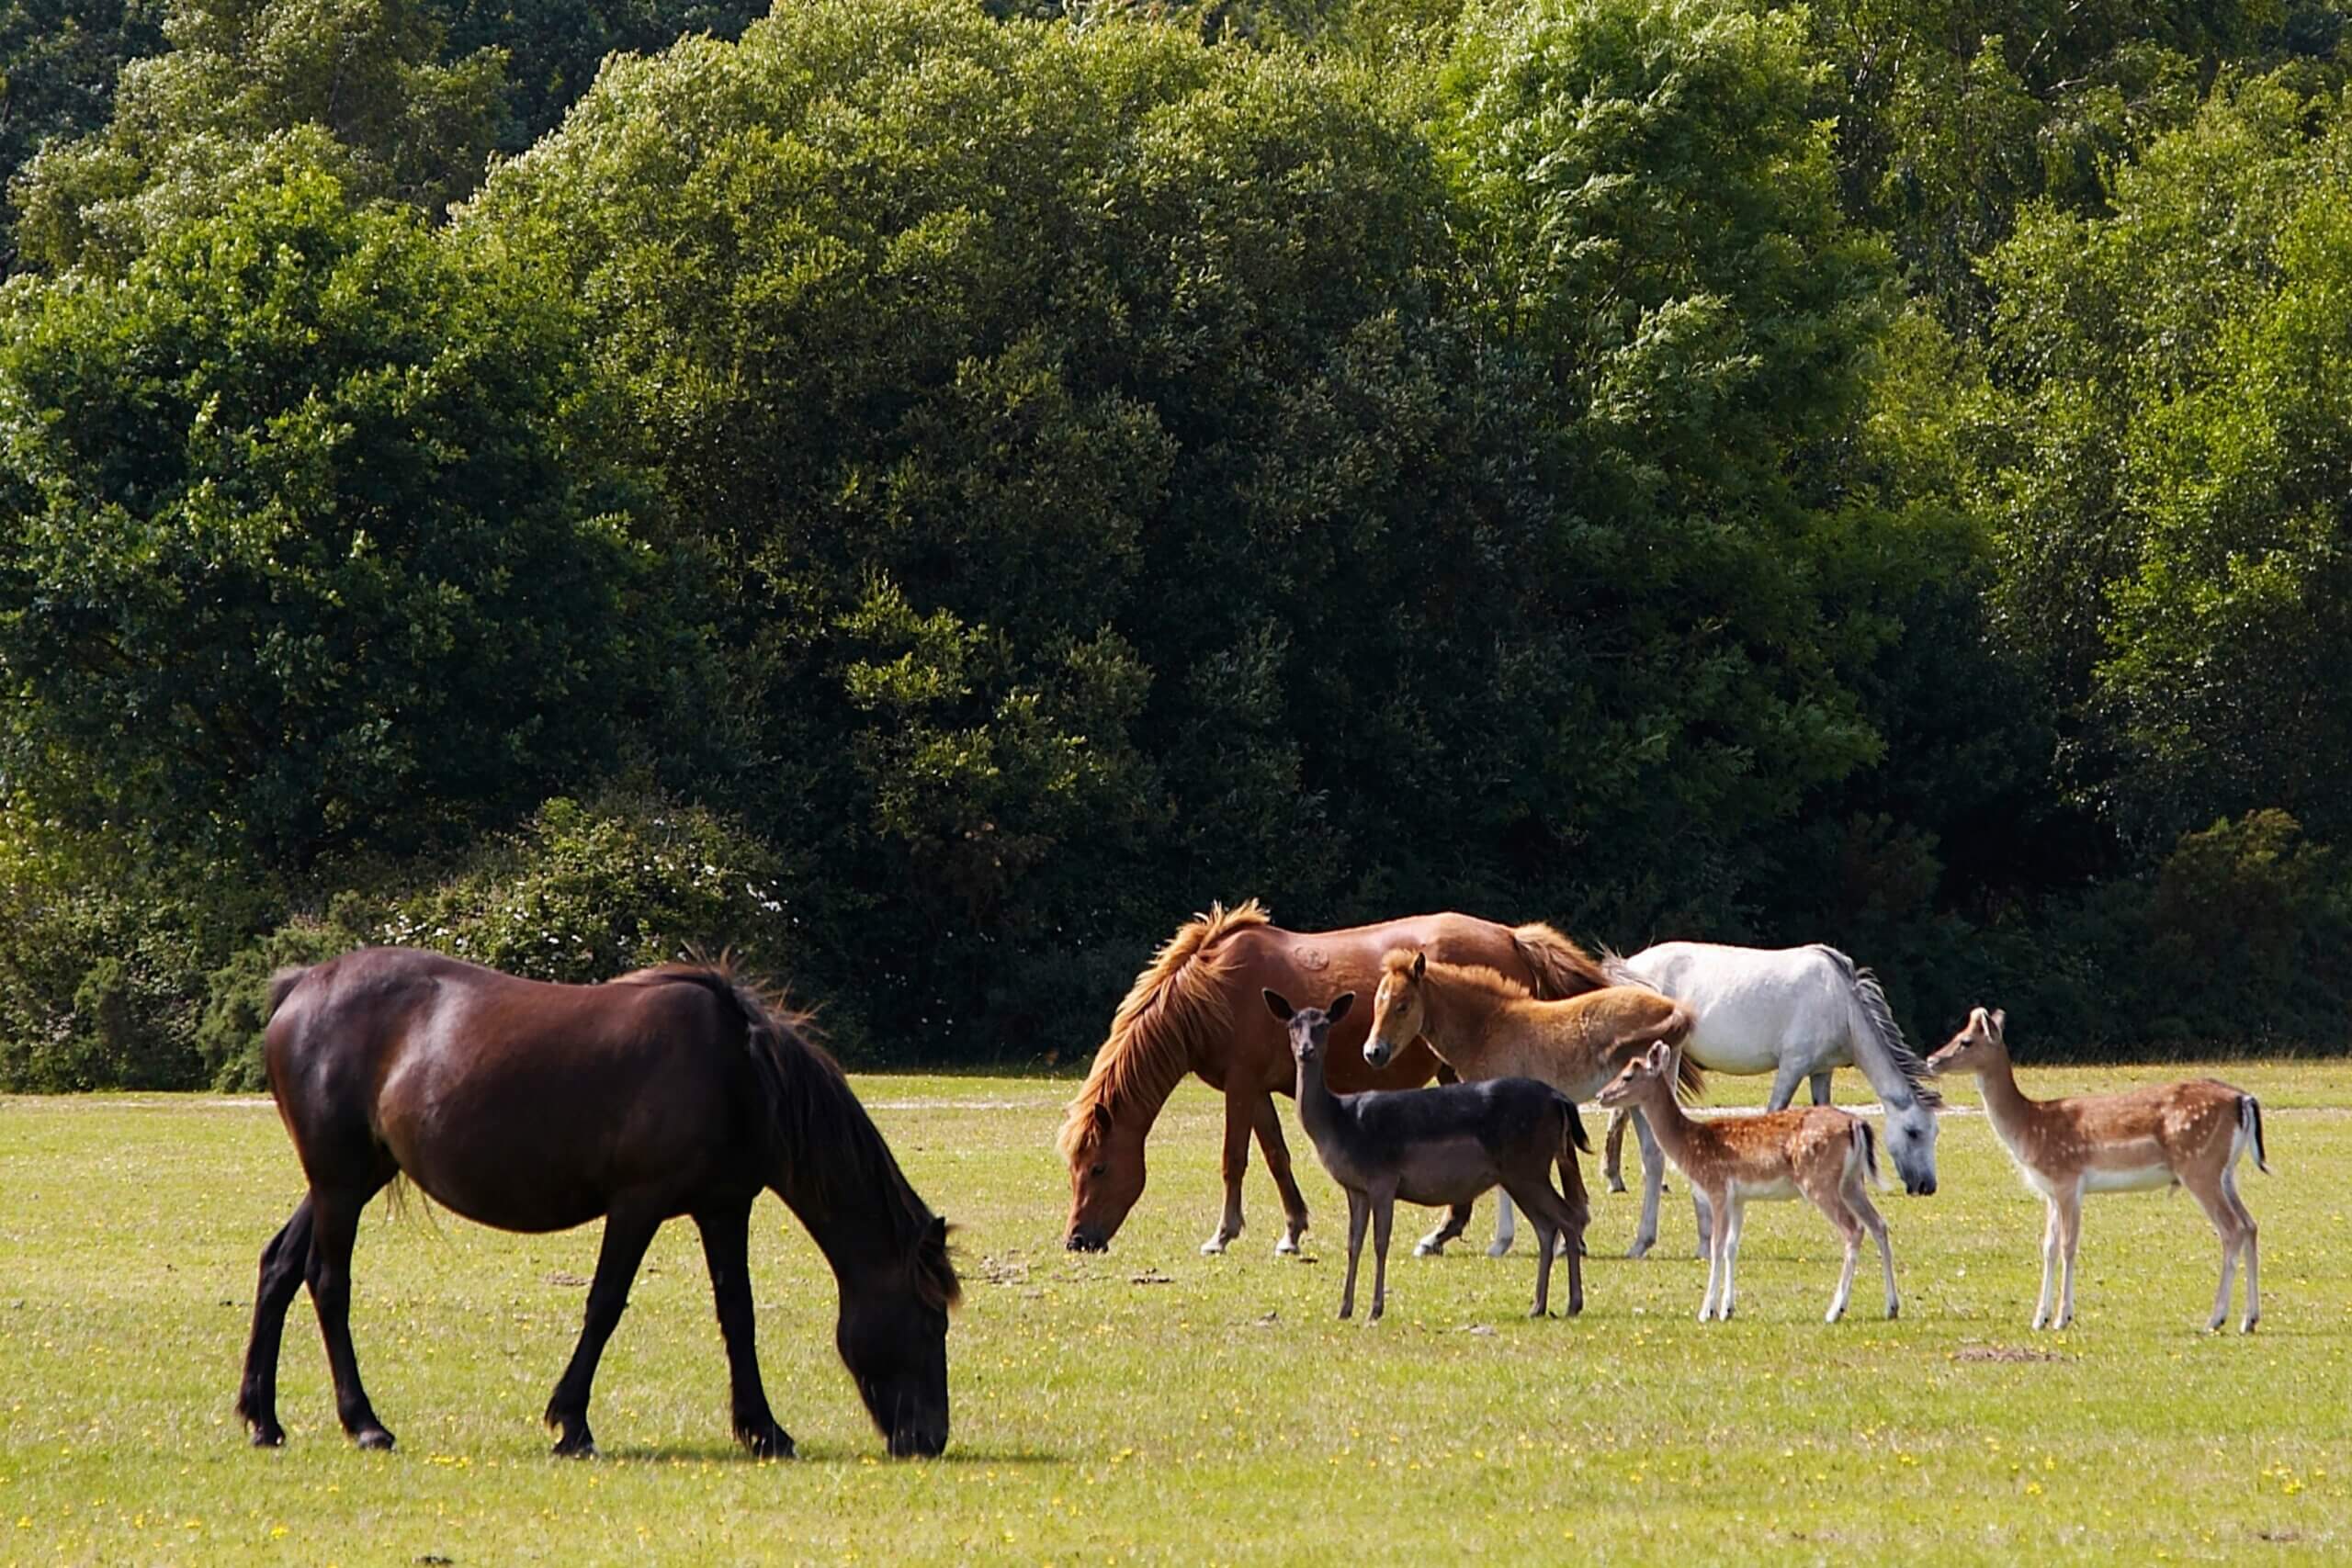 Ponies grazing in the New Forest, England 